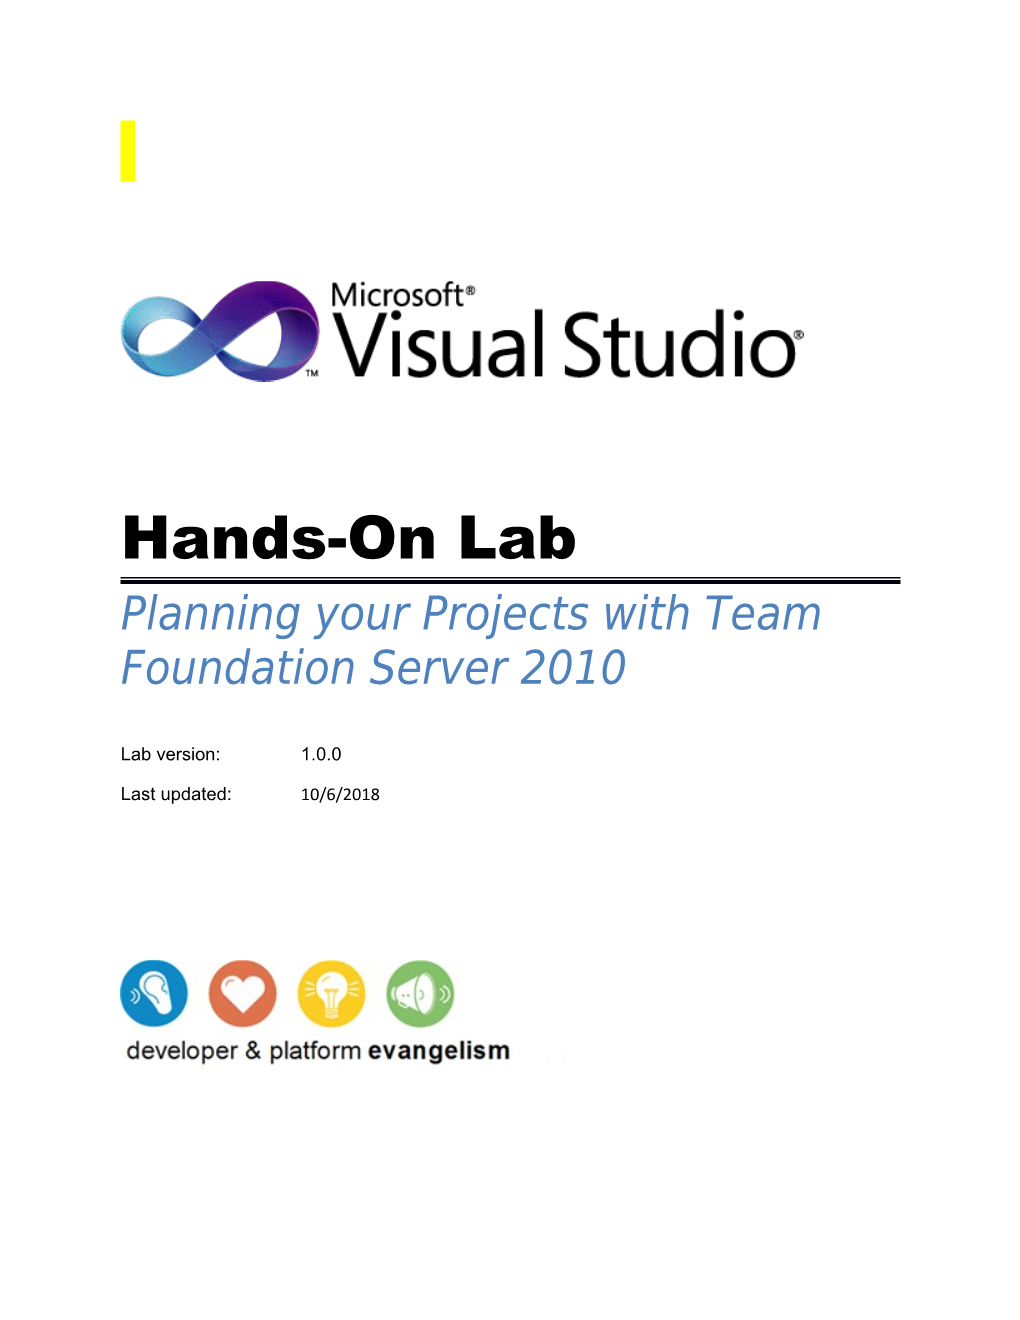 Planning Your Projects with Team Foundation Server 2010